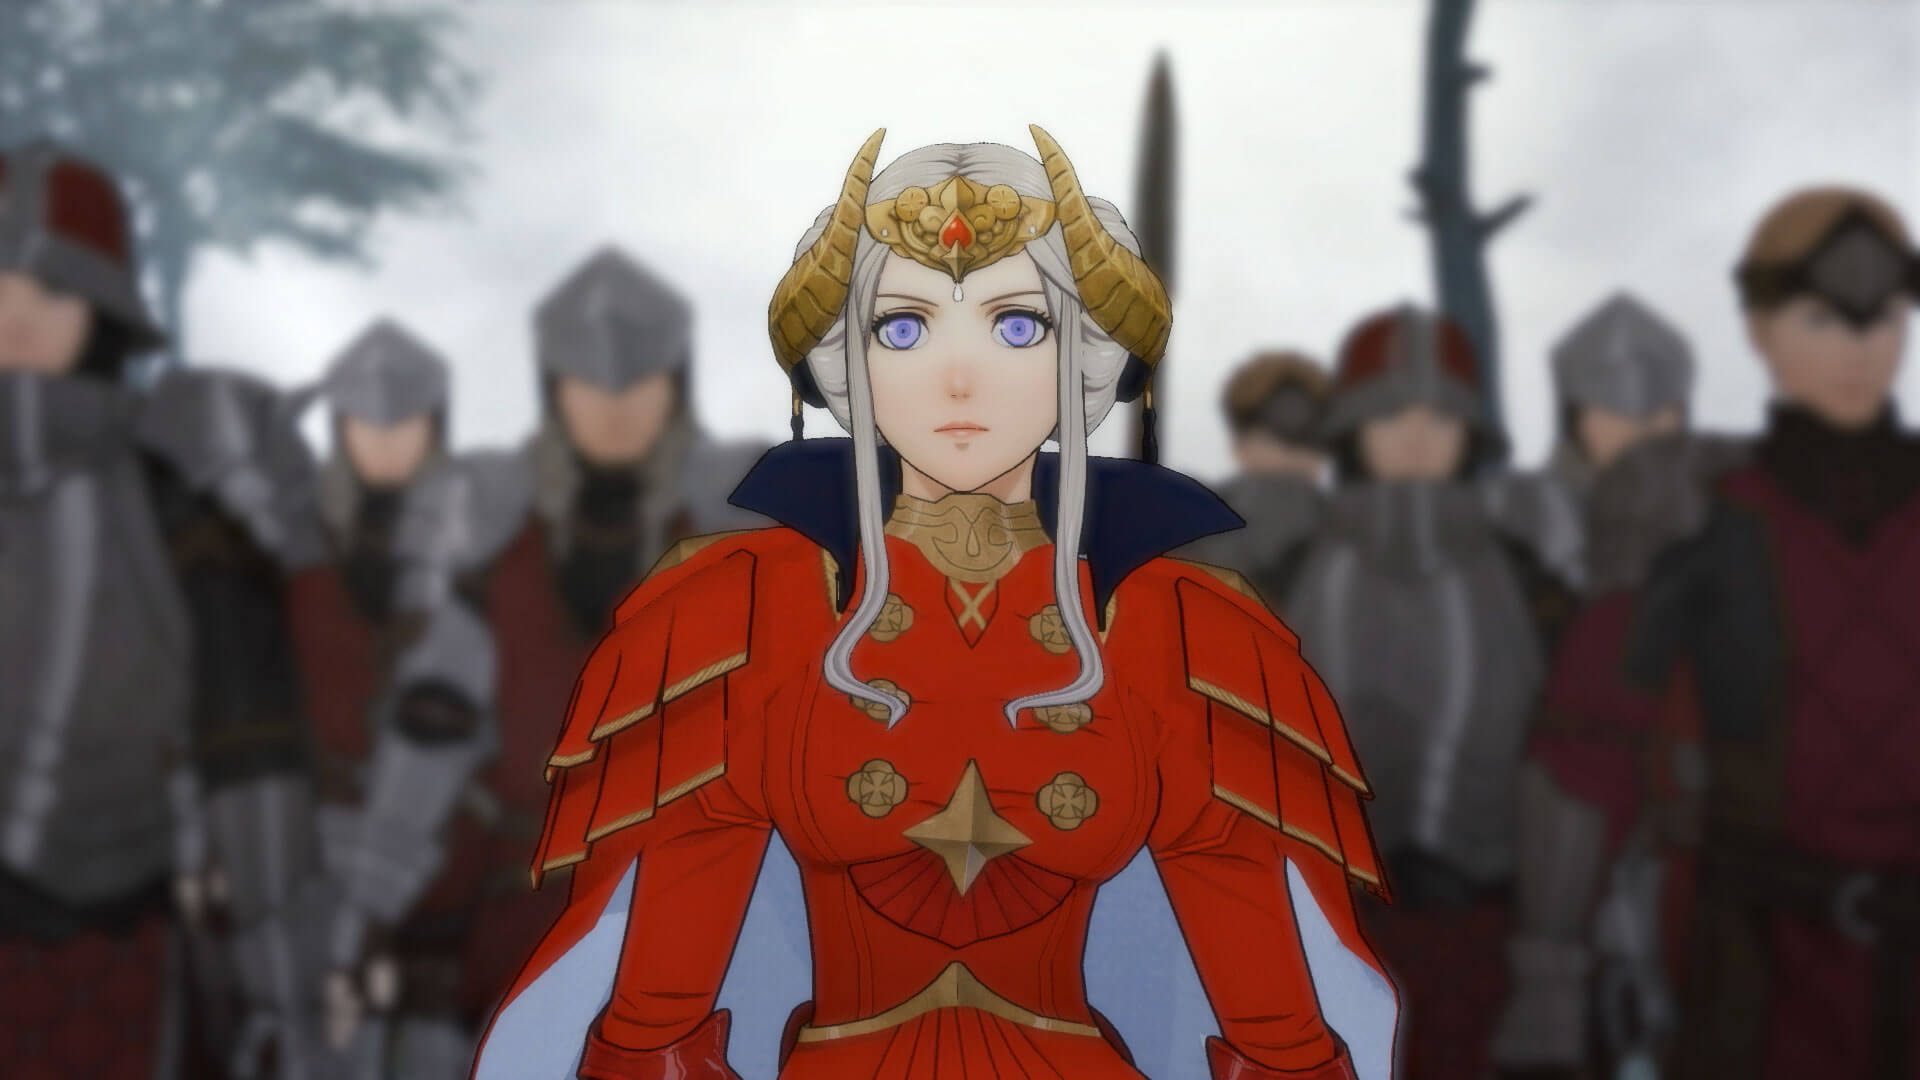 Fire Emblem: Three Houses Director Doesn't Know Why Series is Popular in the West